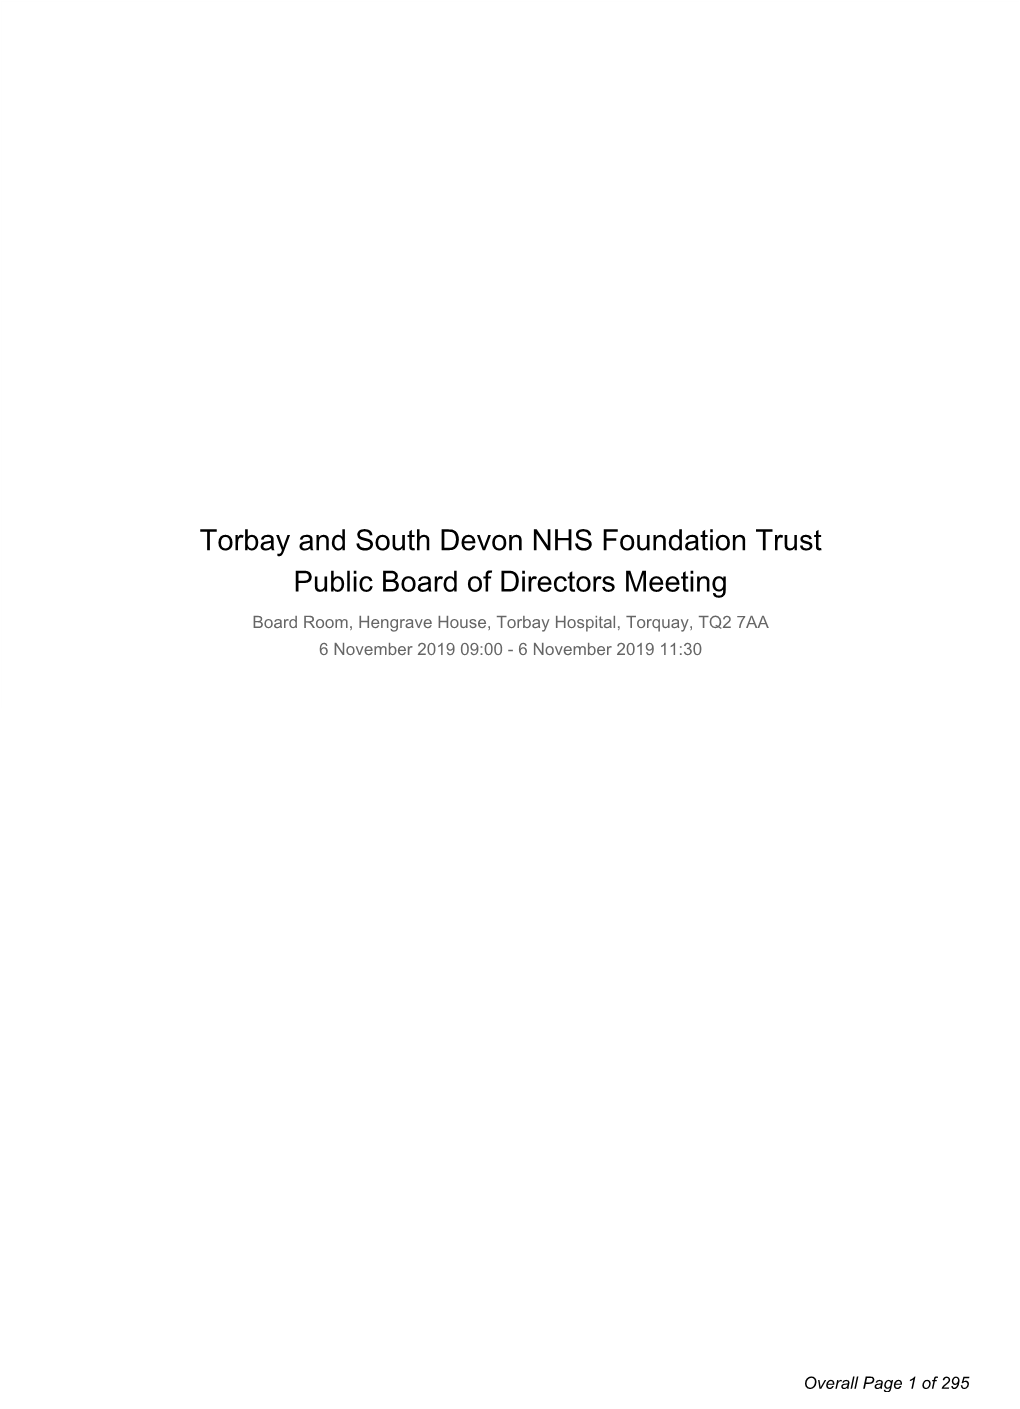 Trust Board Papers for 6 November 2019